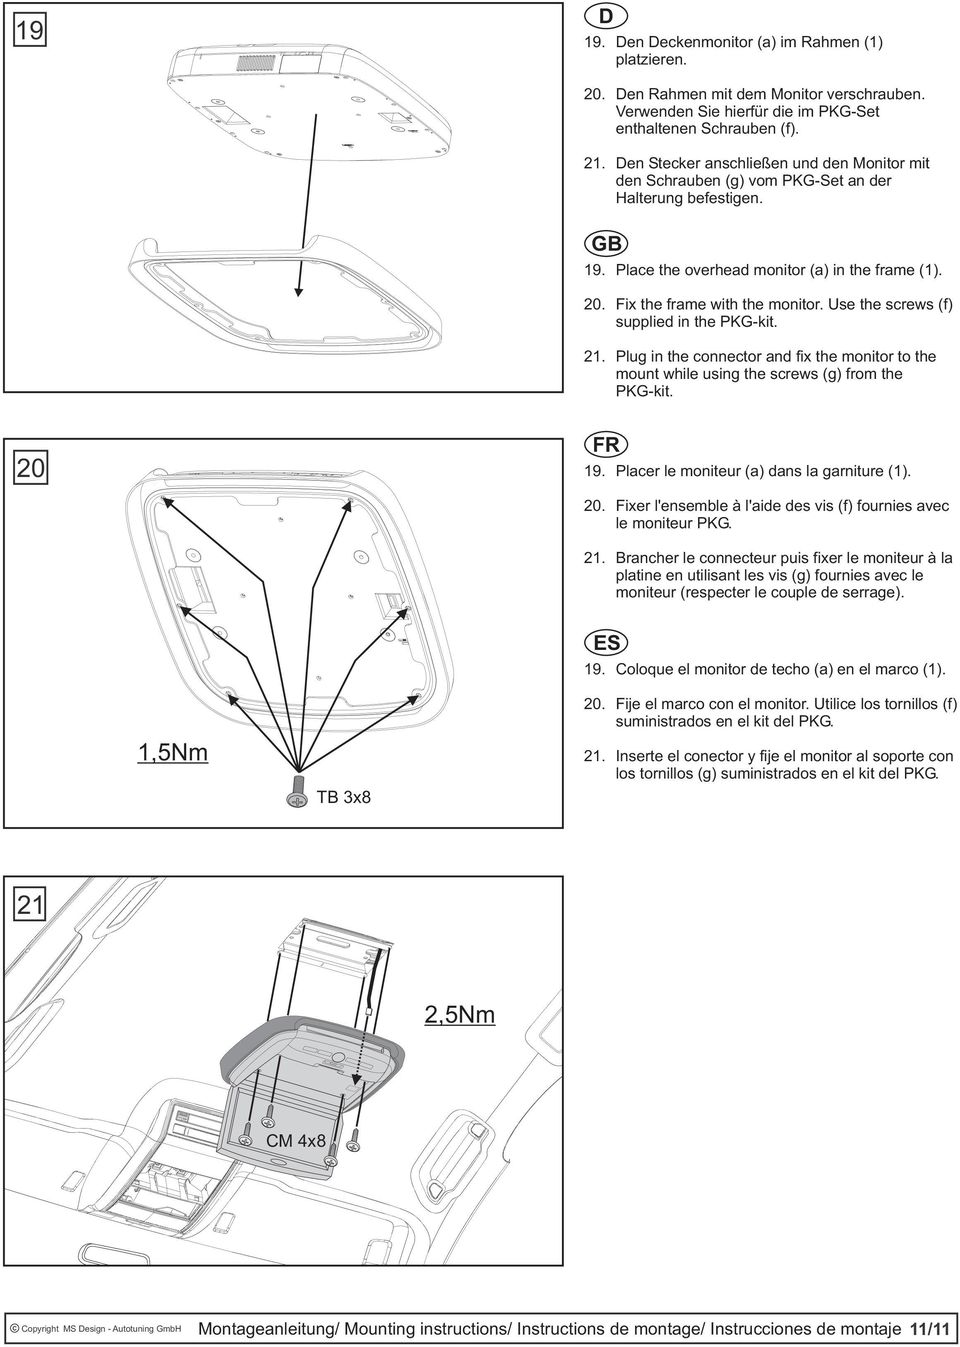 Use the screws (f) supplied in the PKG-kit. 21. Plug in the connector and fix the monitor to the mount while using the screws (g) from the PKG-kit. 20 19. Placer le moniteur (a) dans la garniture (1).